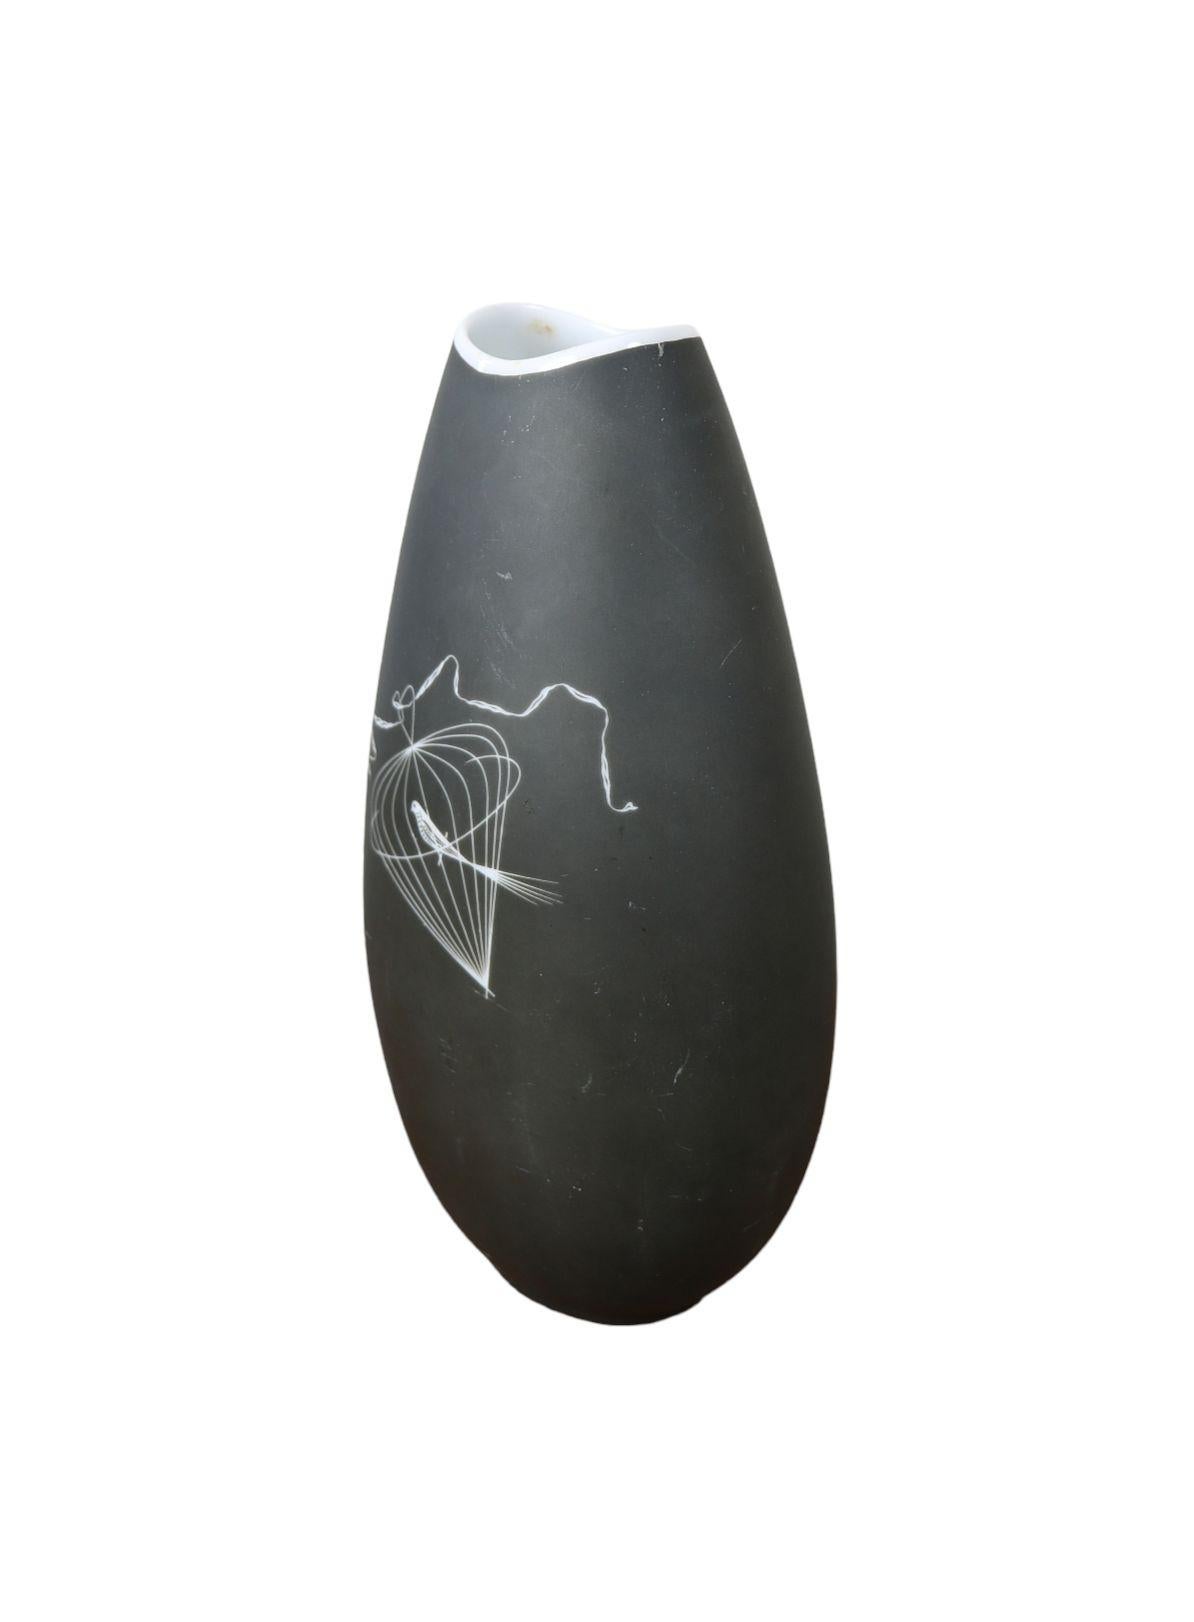 German Rare Black and White Pottery Vase by Thomas (Rosenthal), Model Papageno For Sale